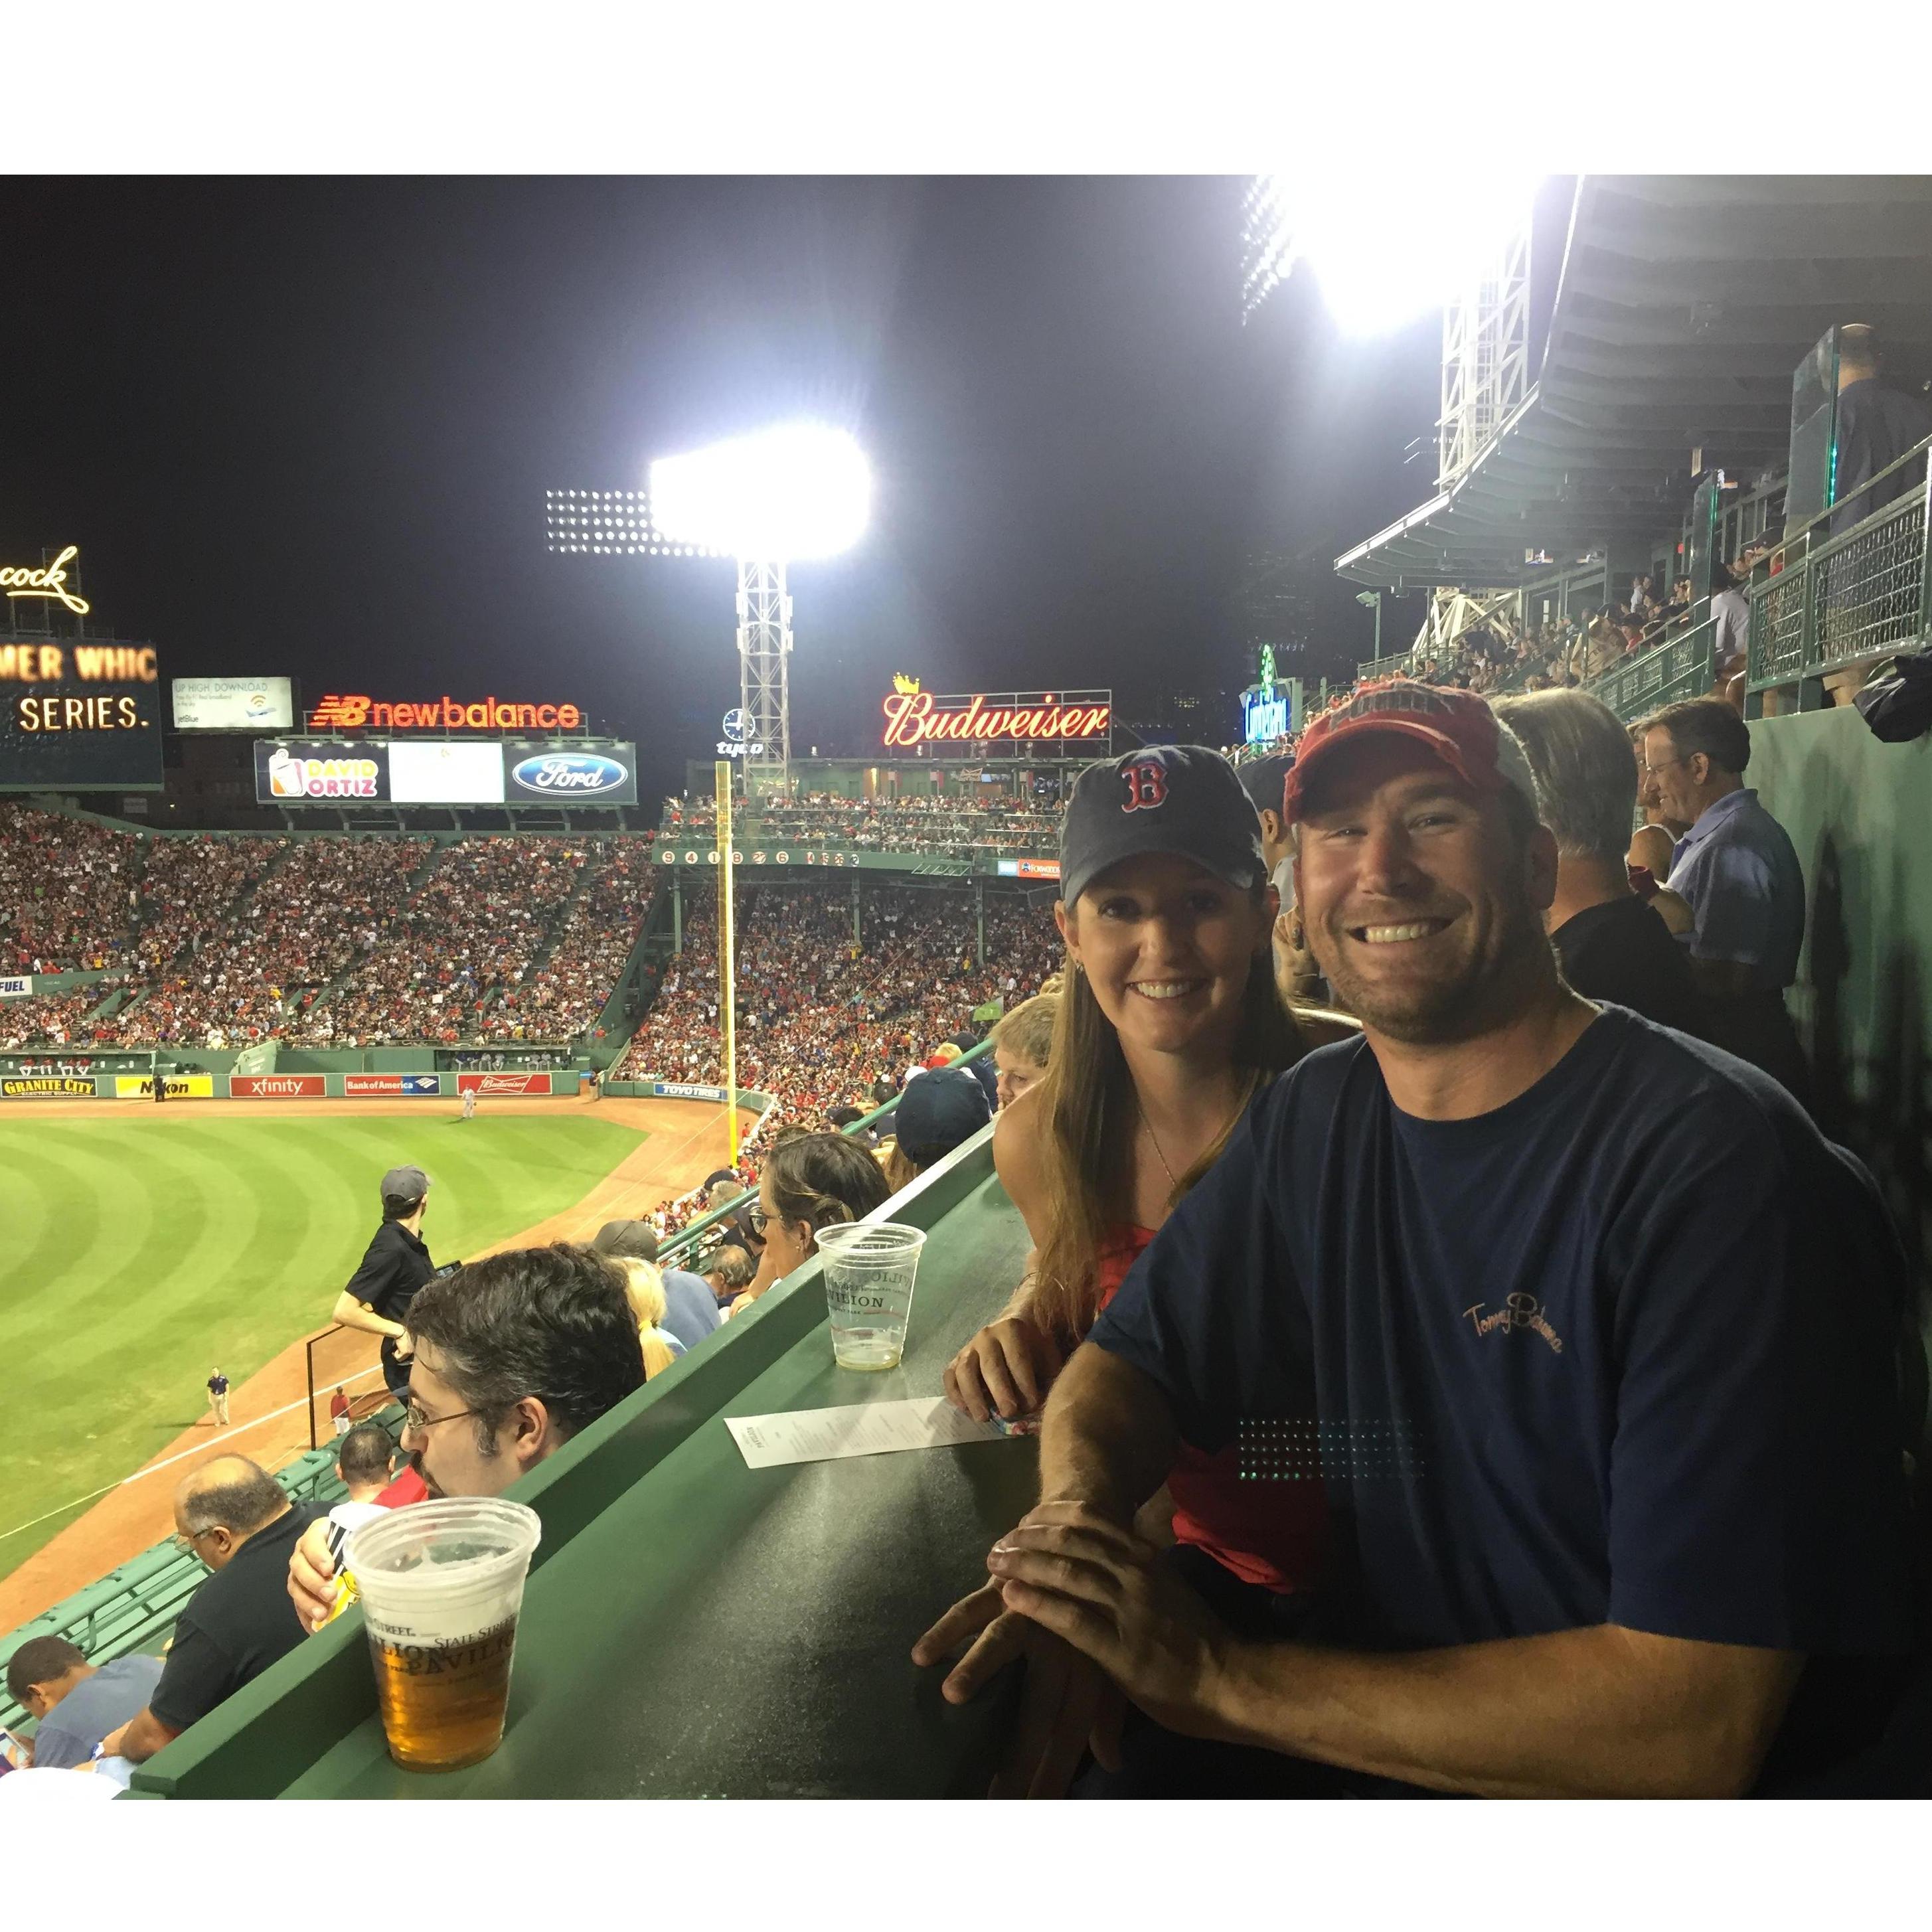 First Red Sox game together